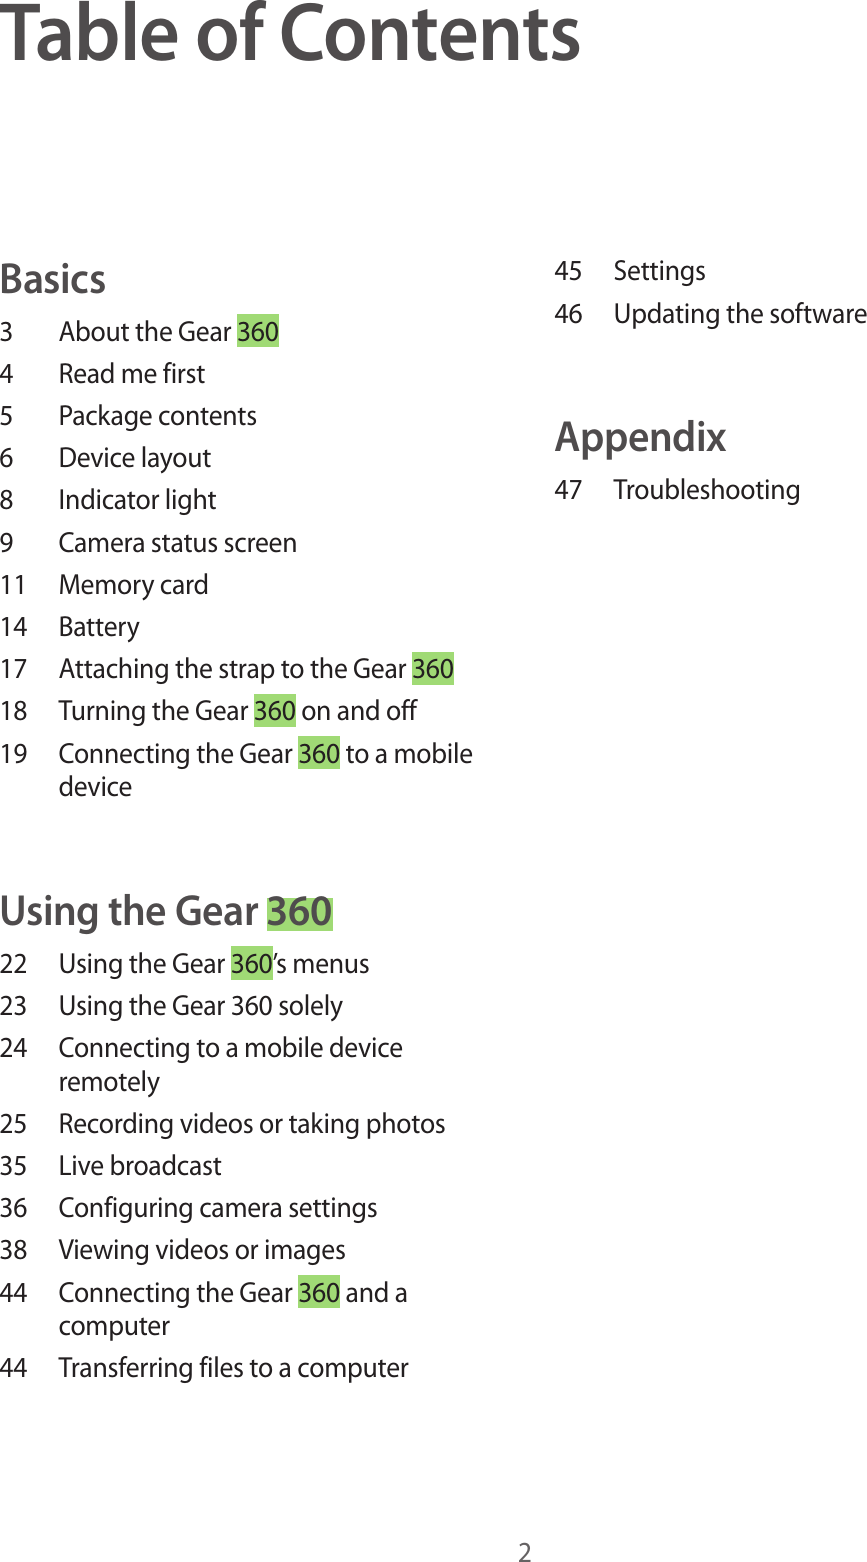 2Table of ContentsBasics3  About the Gear 3604  Read me first5  Package contents6  Device layout8  Indicator light9  Camera status screen11  Memory card14 Battery17  Attaching the strap to the Gear 36018  Turning the Gear 360 on and off19  Connecting the Gear 360 to a mobile deviceUsing the Gear 36022  Using the Gear 360’s menus23  Using the Gear 360 solely24  Connecting to a mobile device remotely25  Recording videos or taking photos35  Live broadcast36  Configuring camera settings38  Viewing videos or images44  Connecting the Gear 360 and a computer44  Transferring files to a computer45 Settings46  Updating the softwareAppendix47 Troubleshooting